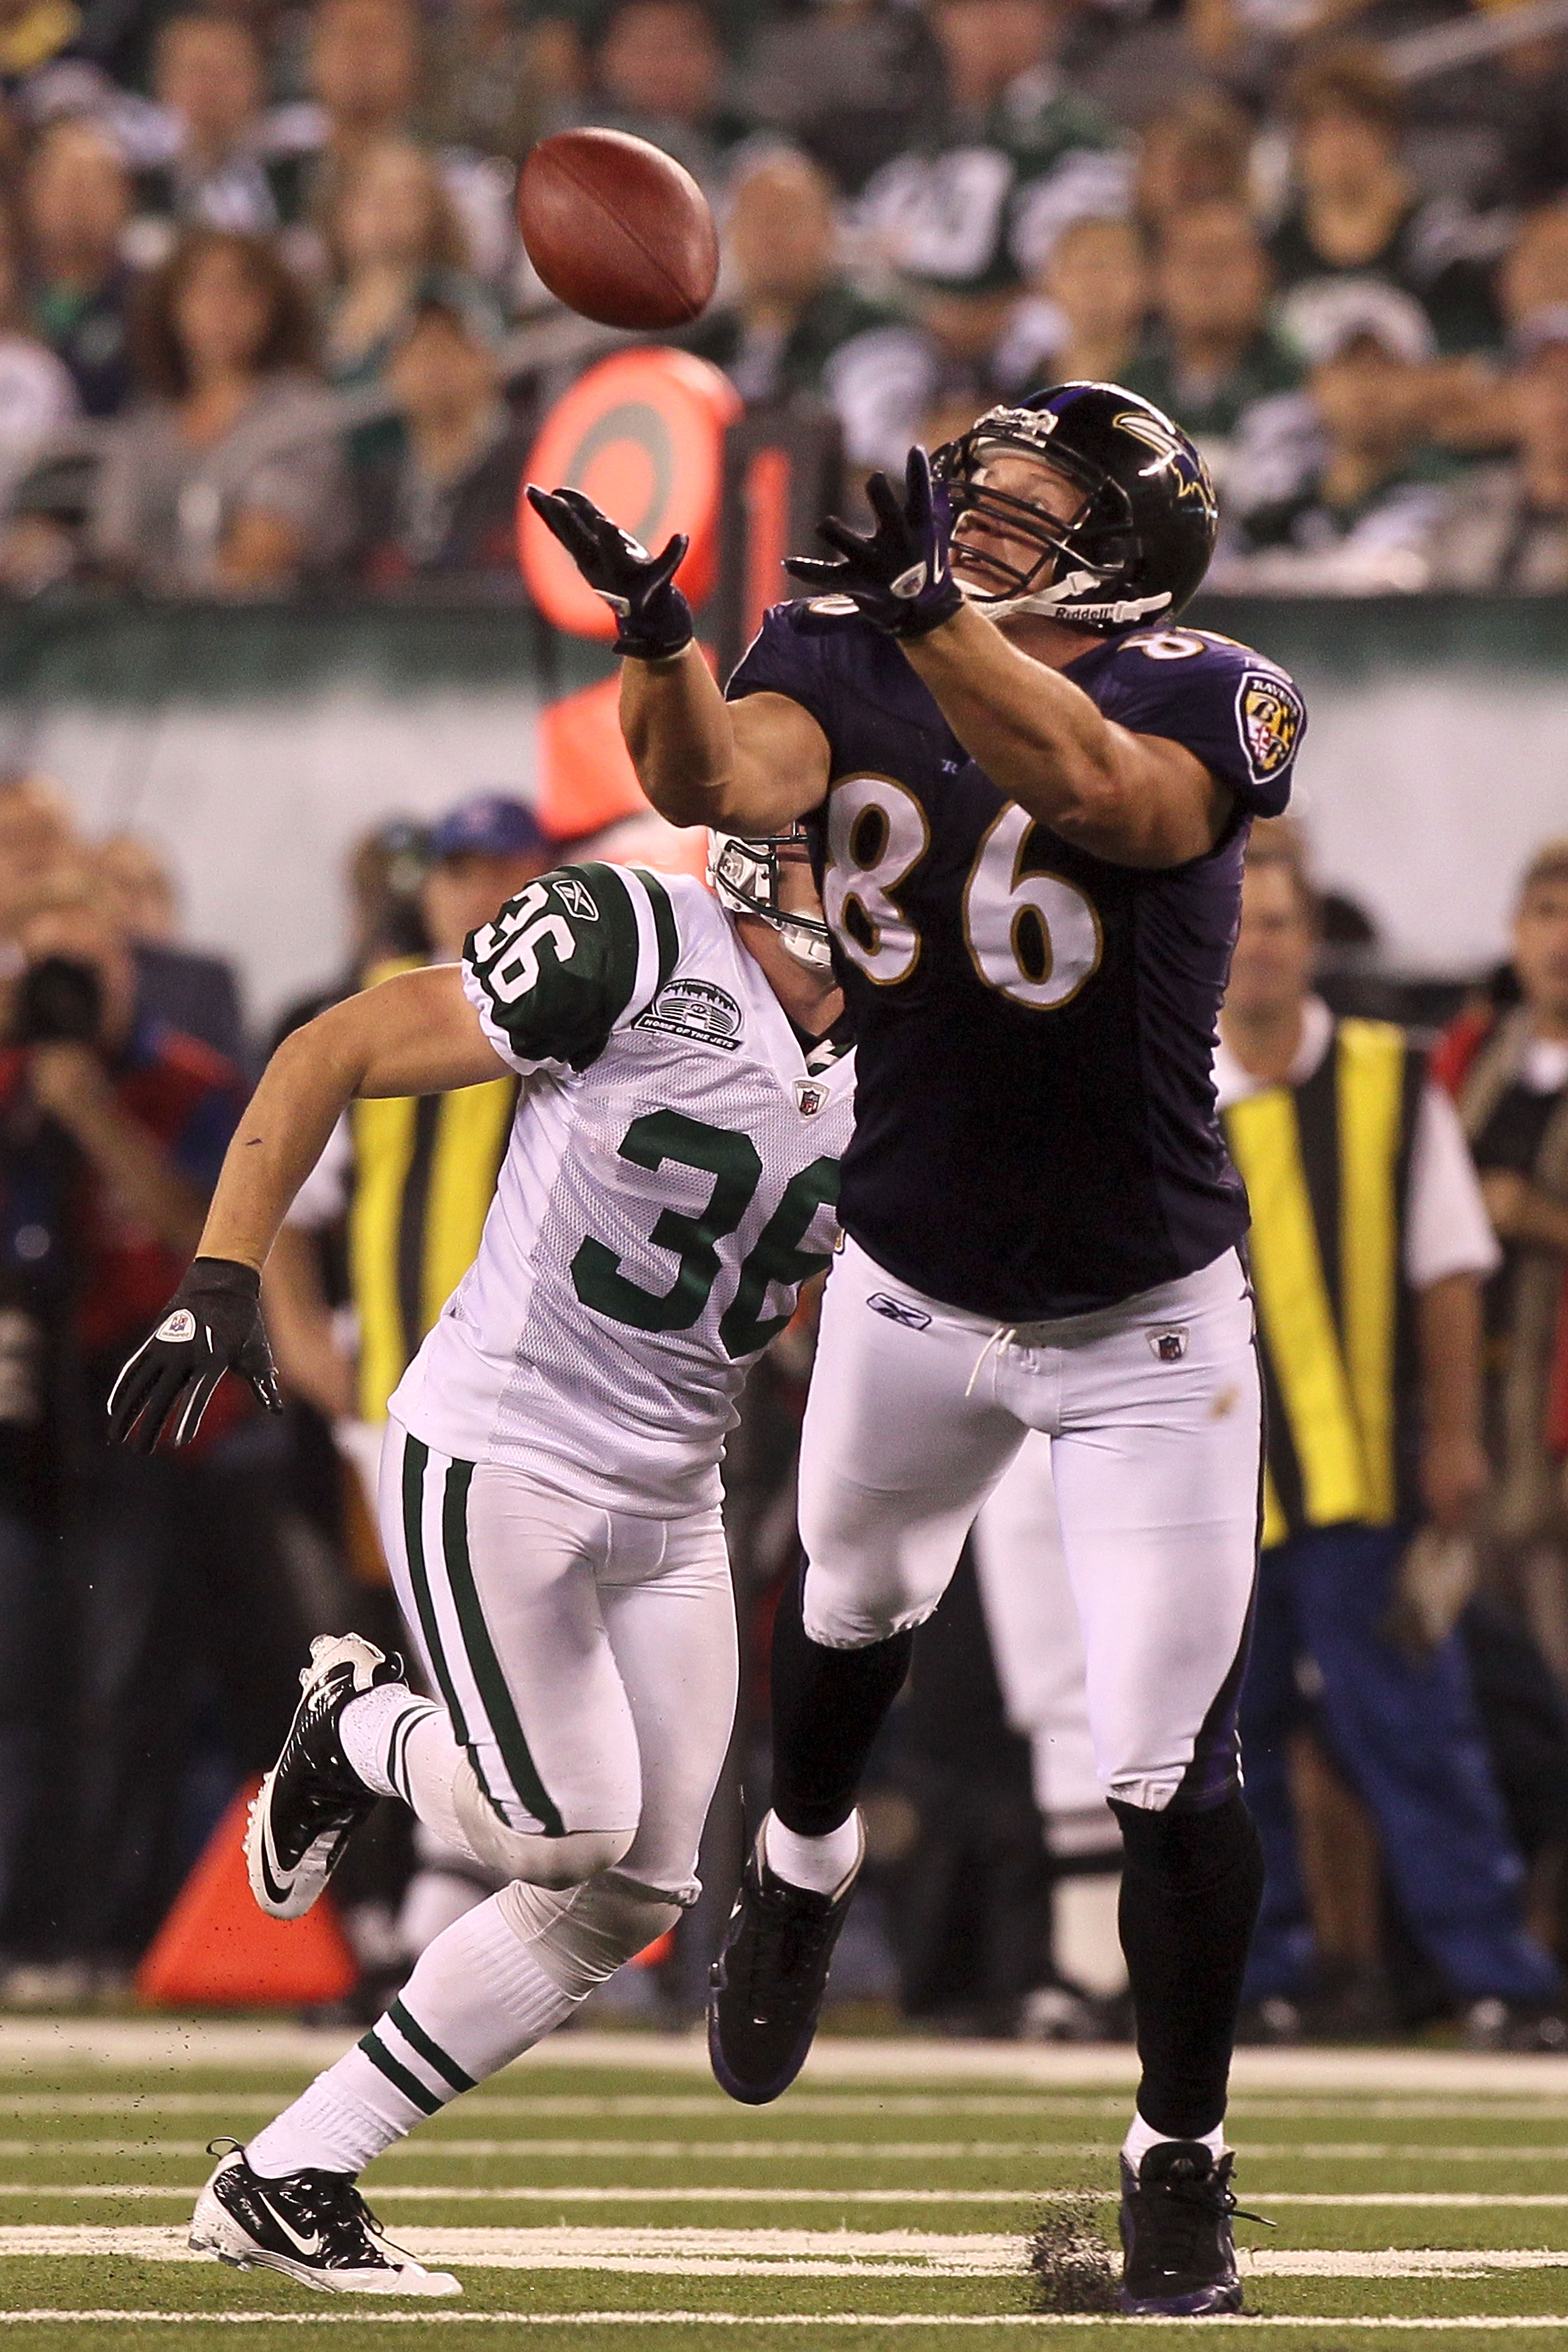 EAST RUTHERFORD, NJ - SEPTEMBER 13:  Todd Heap #86 of the Baltimore Ravens catches a pass over Jim Leonhard #36 of the New York Jets during their home opener at the New Meadowlands Stadium on September 13, 2010 in East Rutherford, New Jersey.  (Photo by J